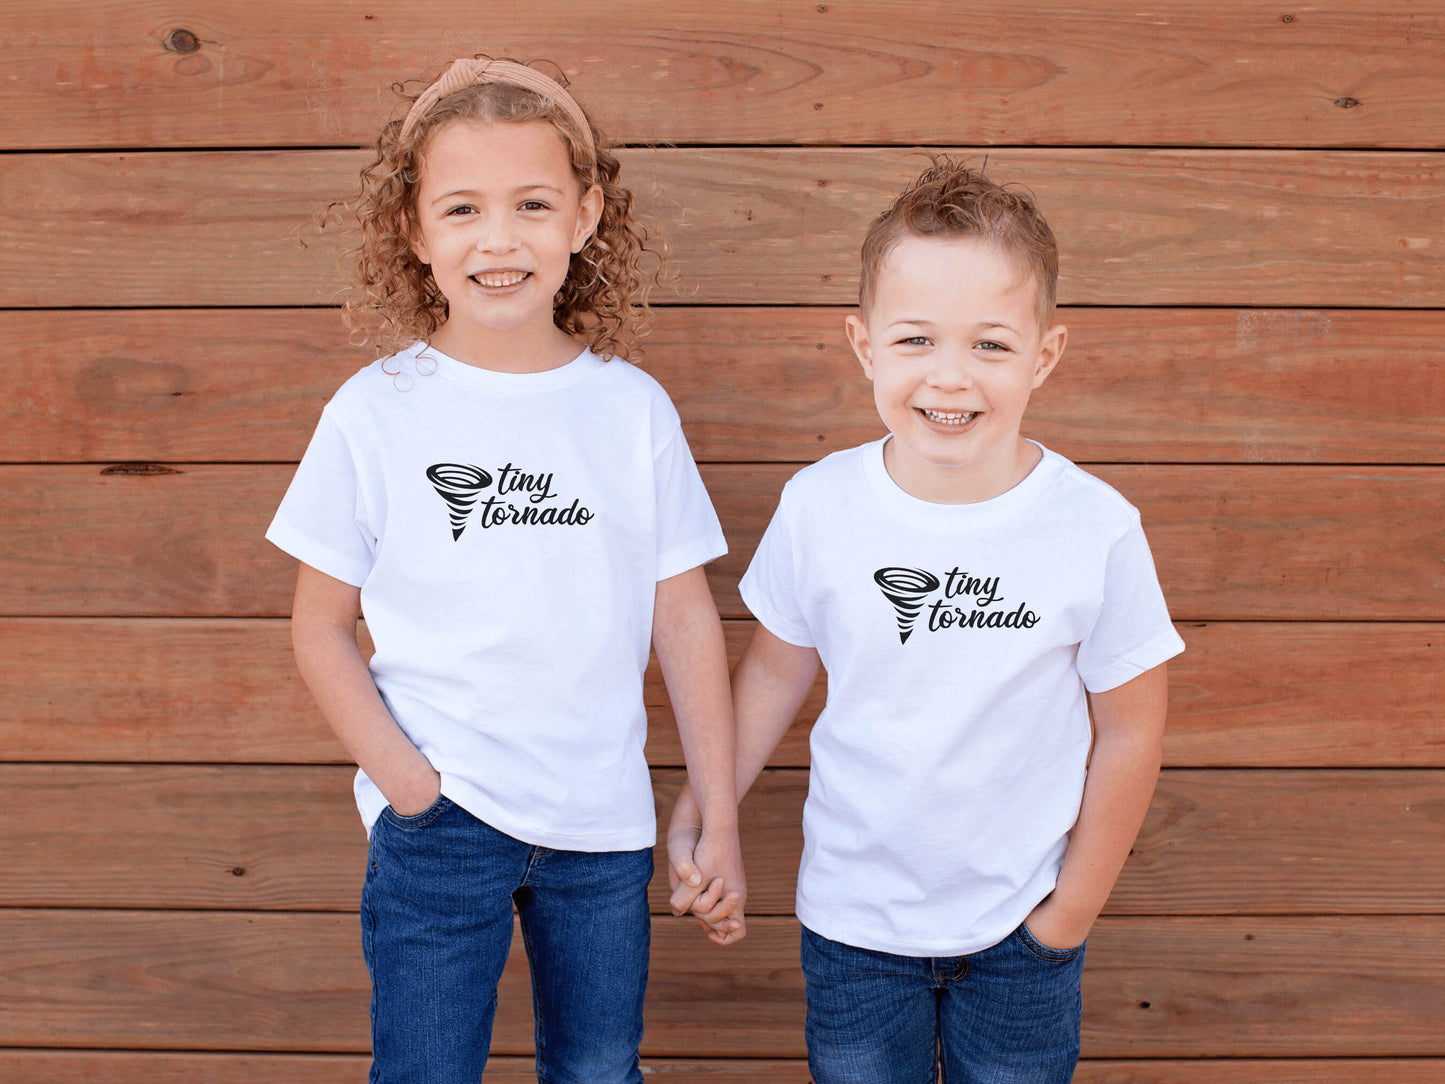 Matching Mom and Kids Shirts, Mother Daughter Matching Shirts, Tornado Chaser Tiny Tornado, Mother's Day Gift, Matching Storm Family Shirts